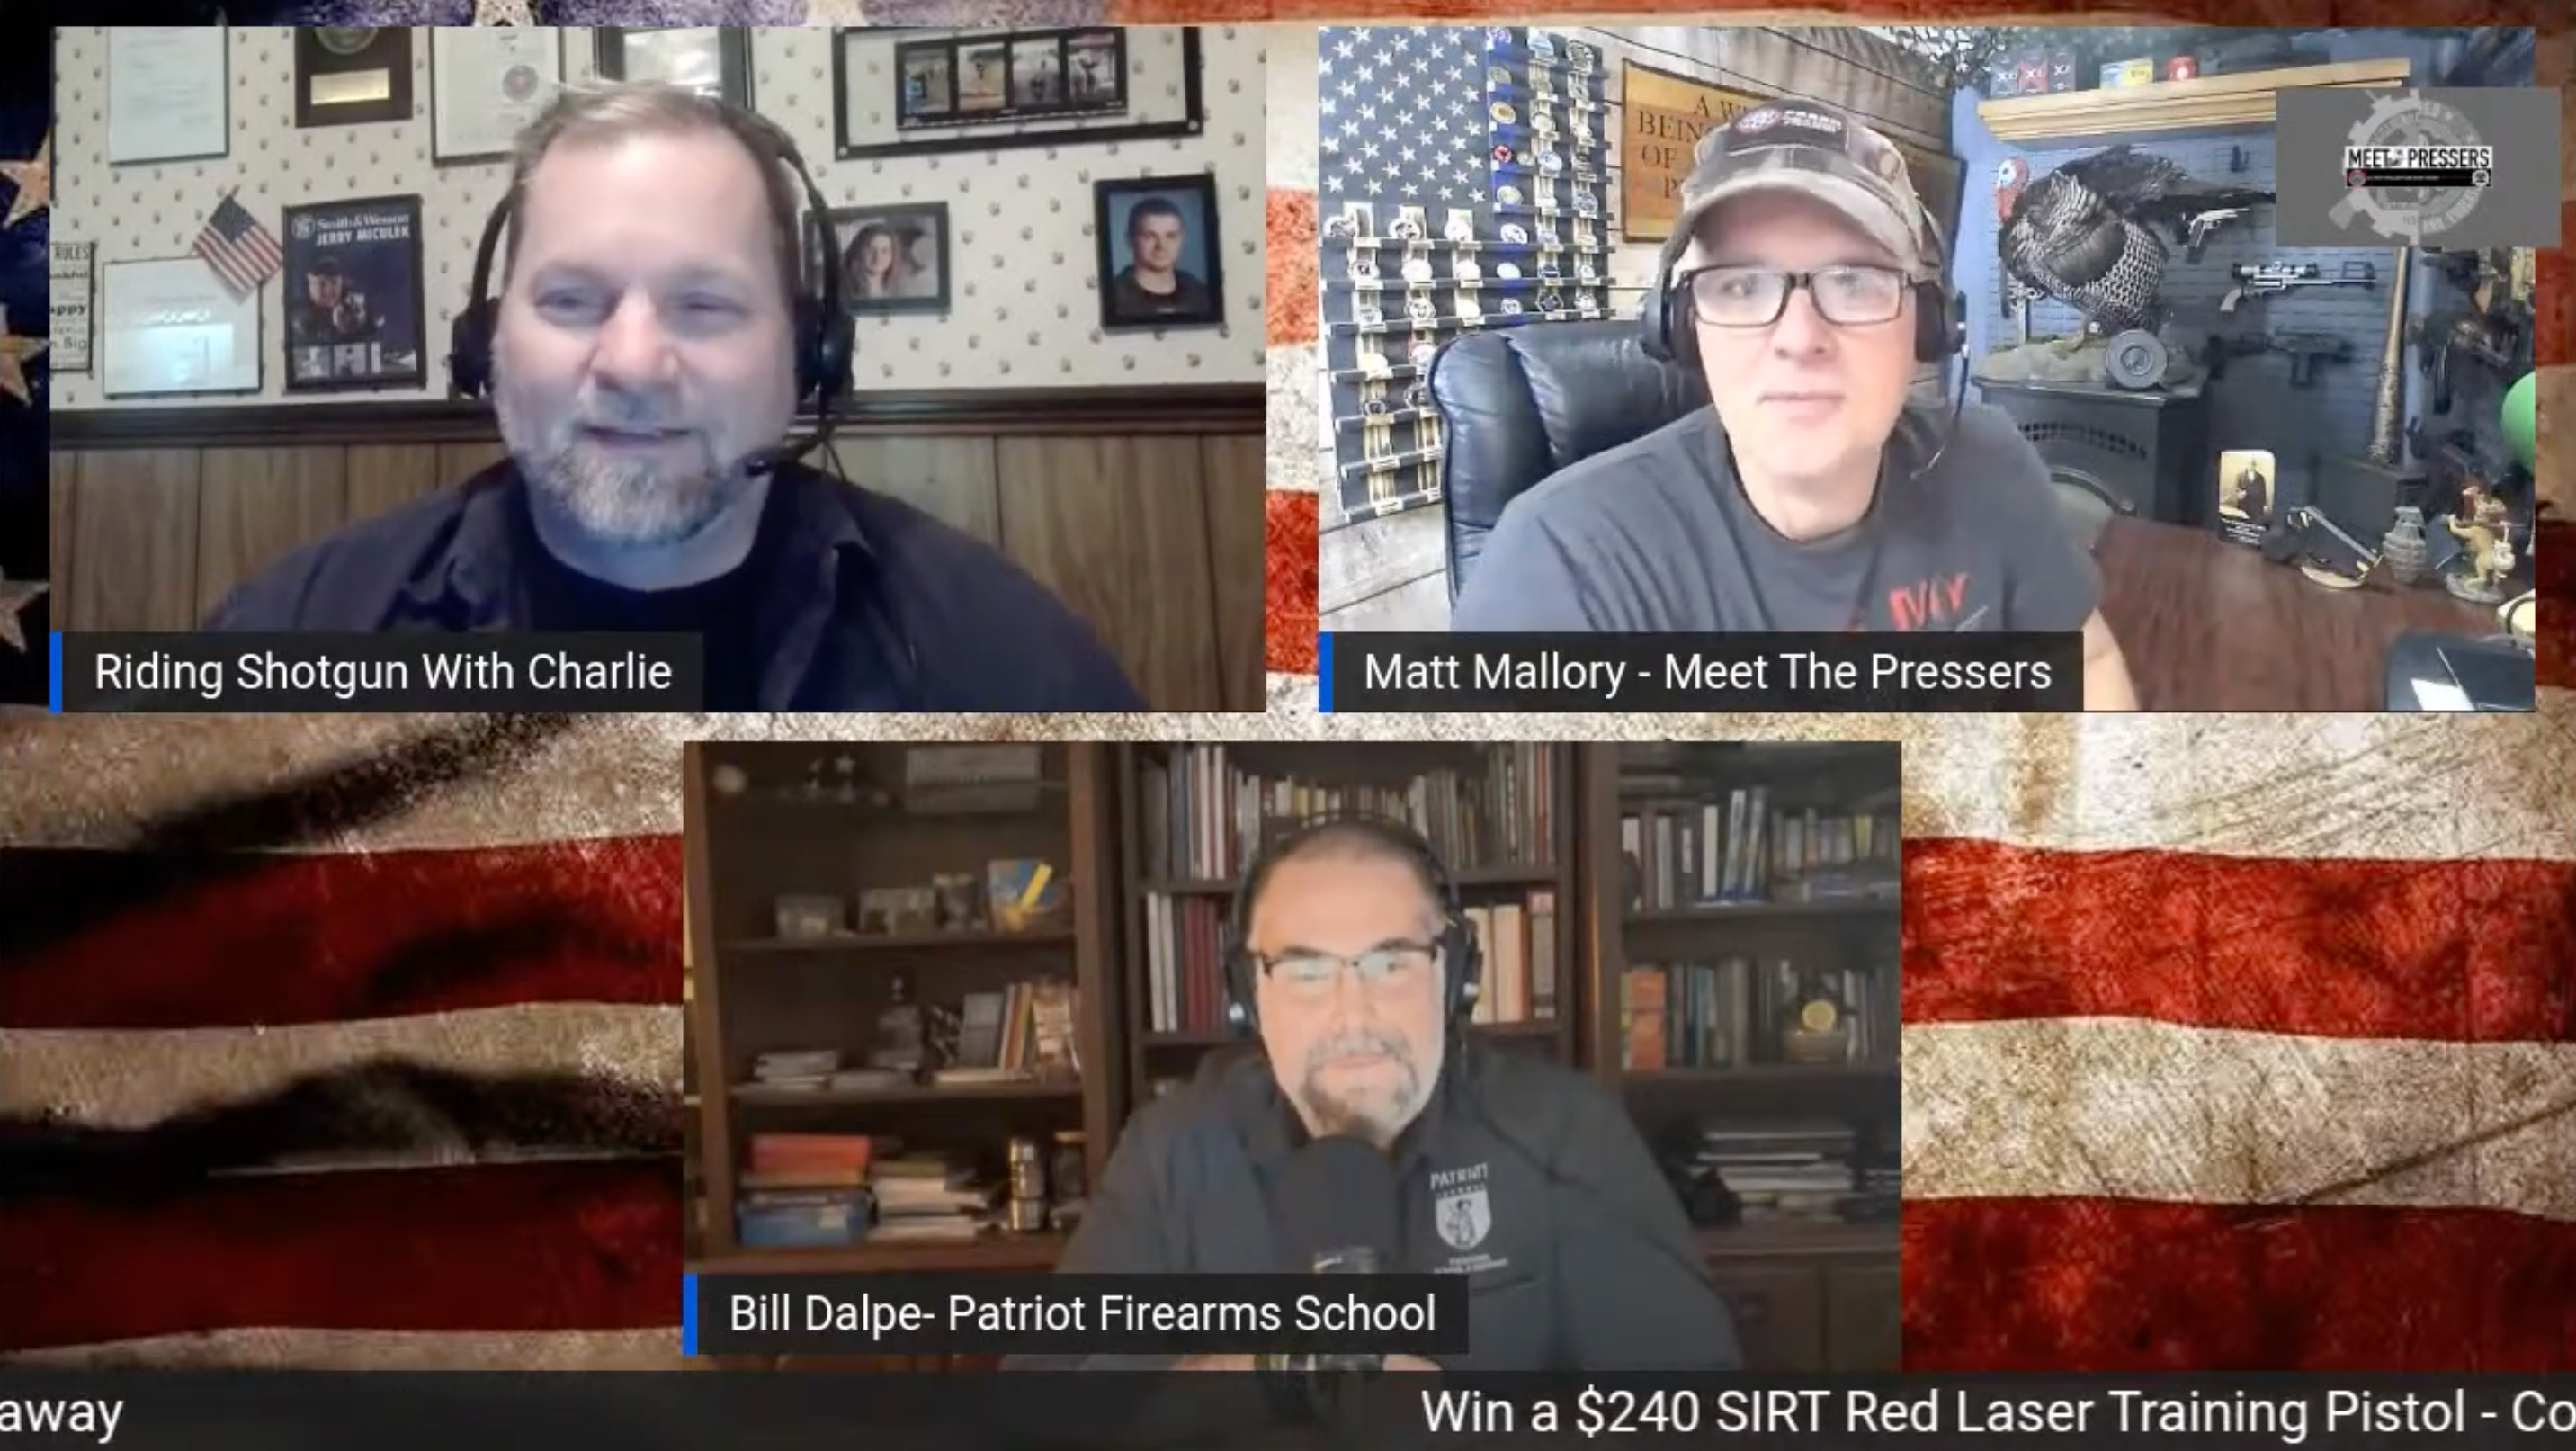 Load video: Bill Dalpe Featured on the Riding Shotgun with Charlie Podcast